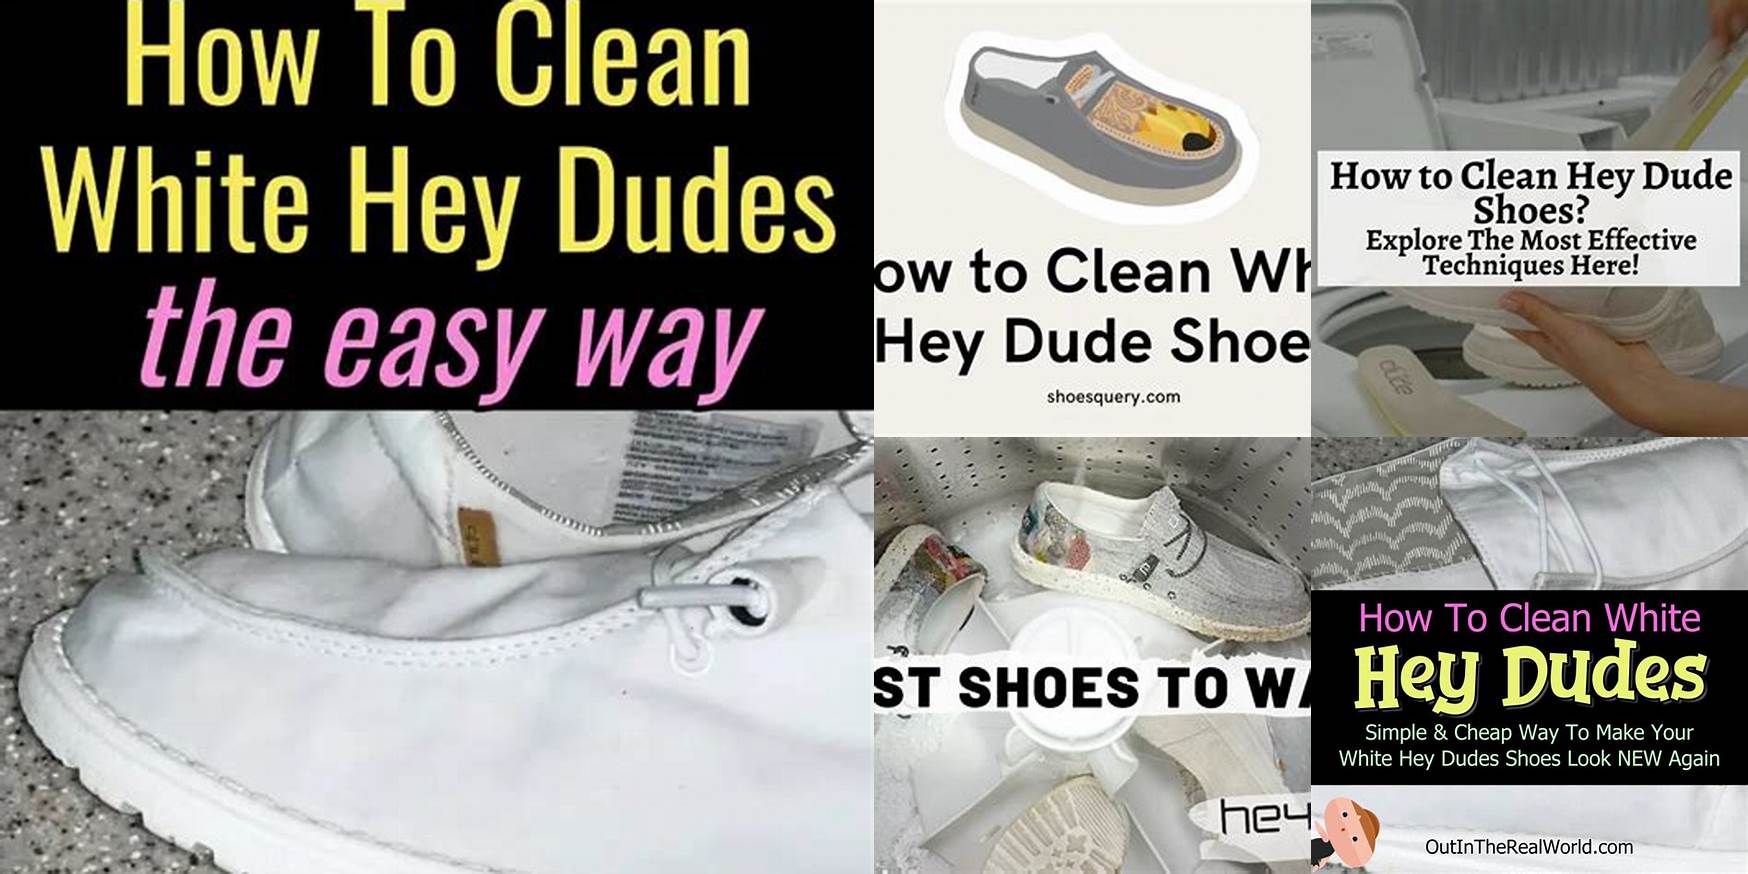 How To Clean White Hey Dude Shoes